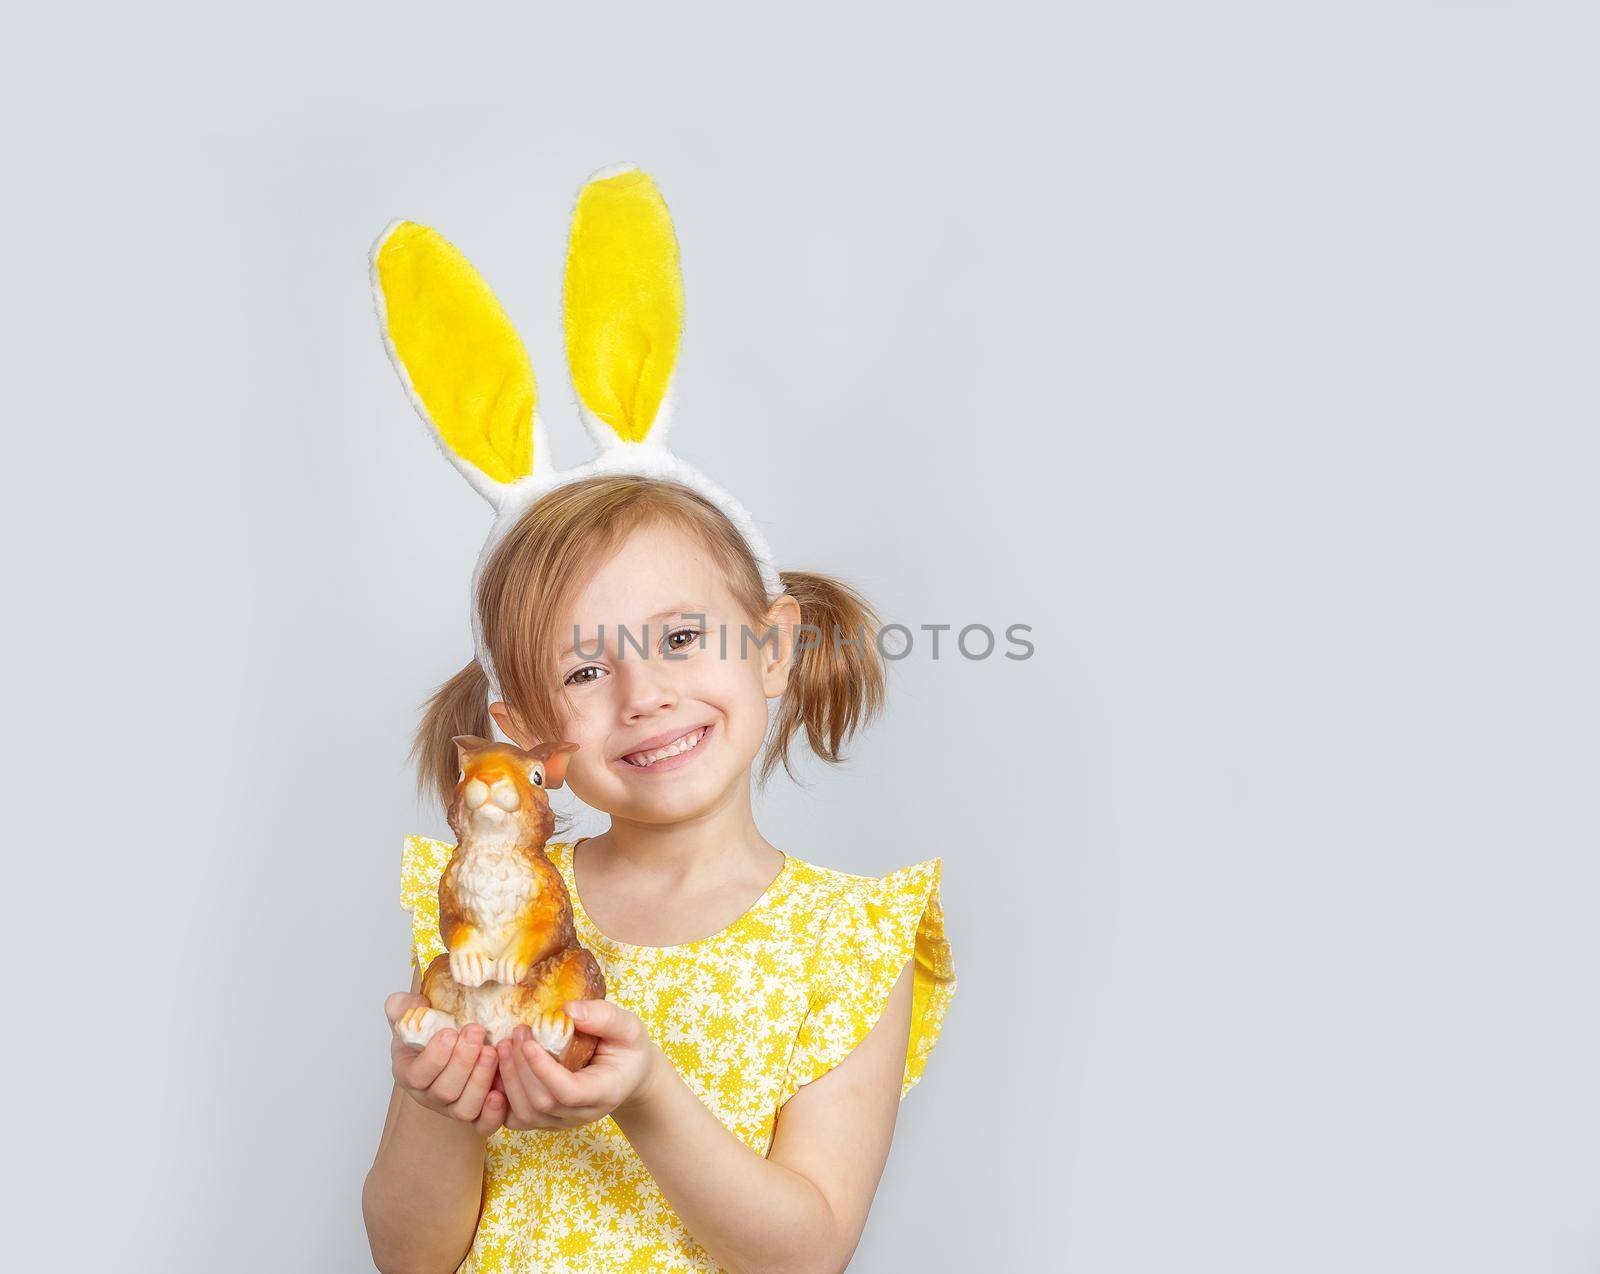 Little Caucasian girl posing on plain background in yellow dress and bunny ears by galinasharapova